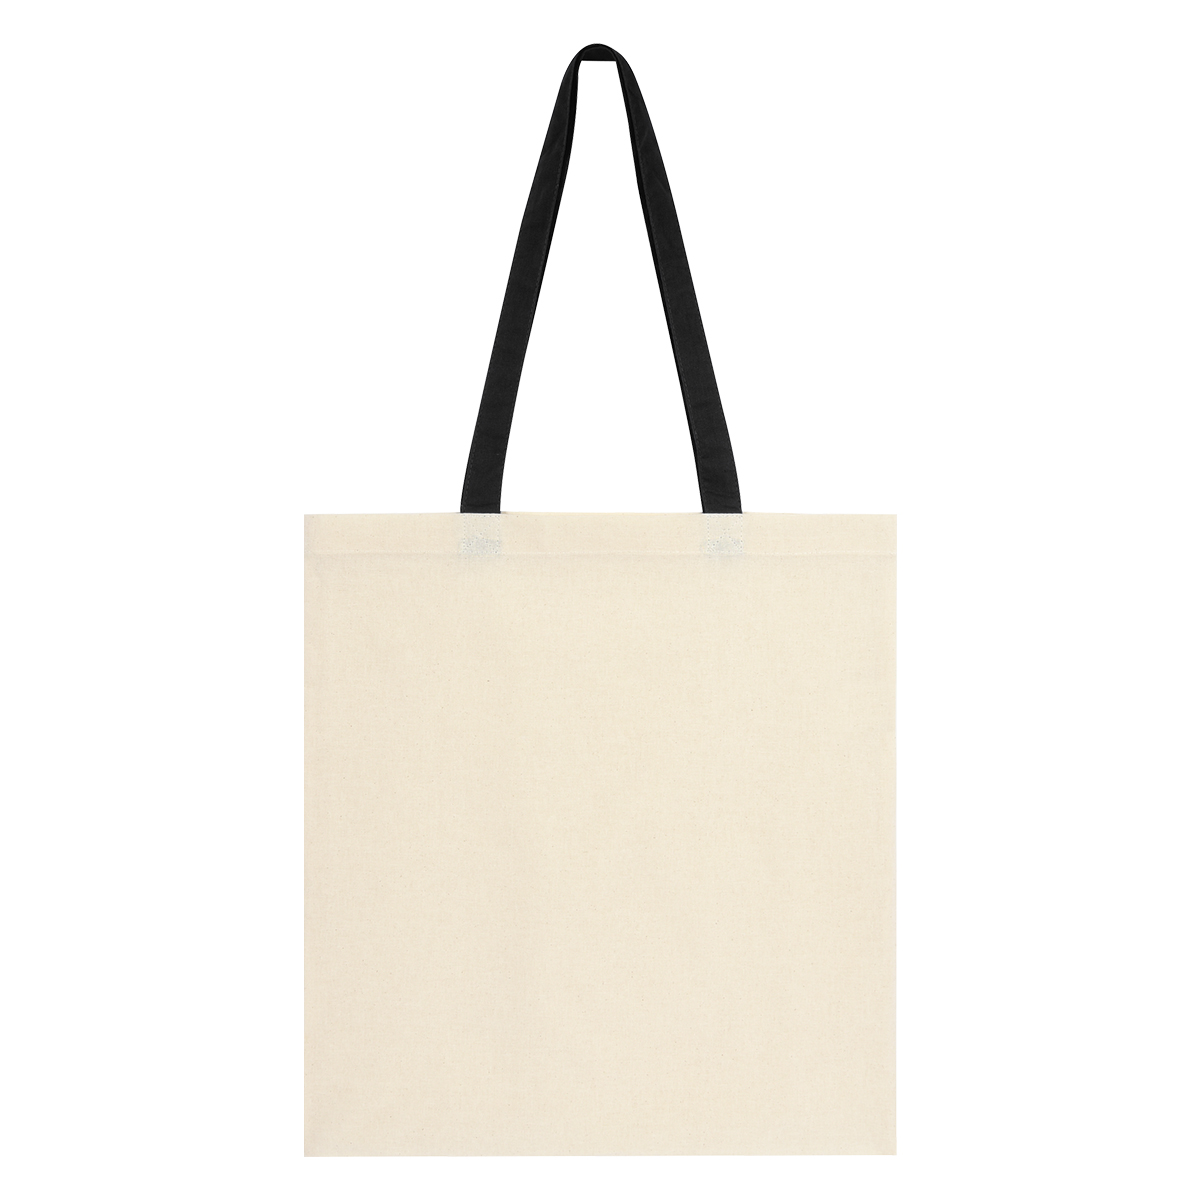 3212 Penny Wise Cotton Canvas Tote Bag - Hit Promotional Products